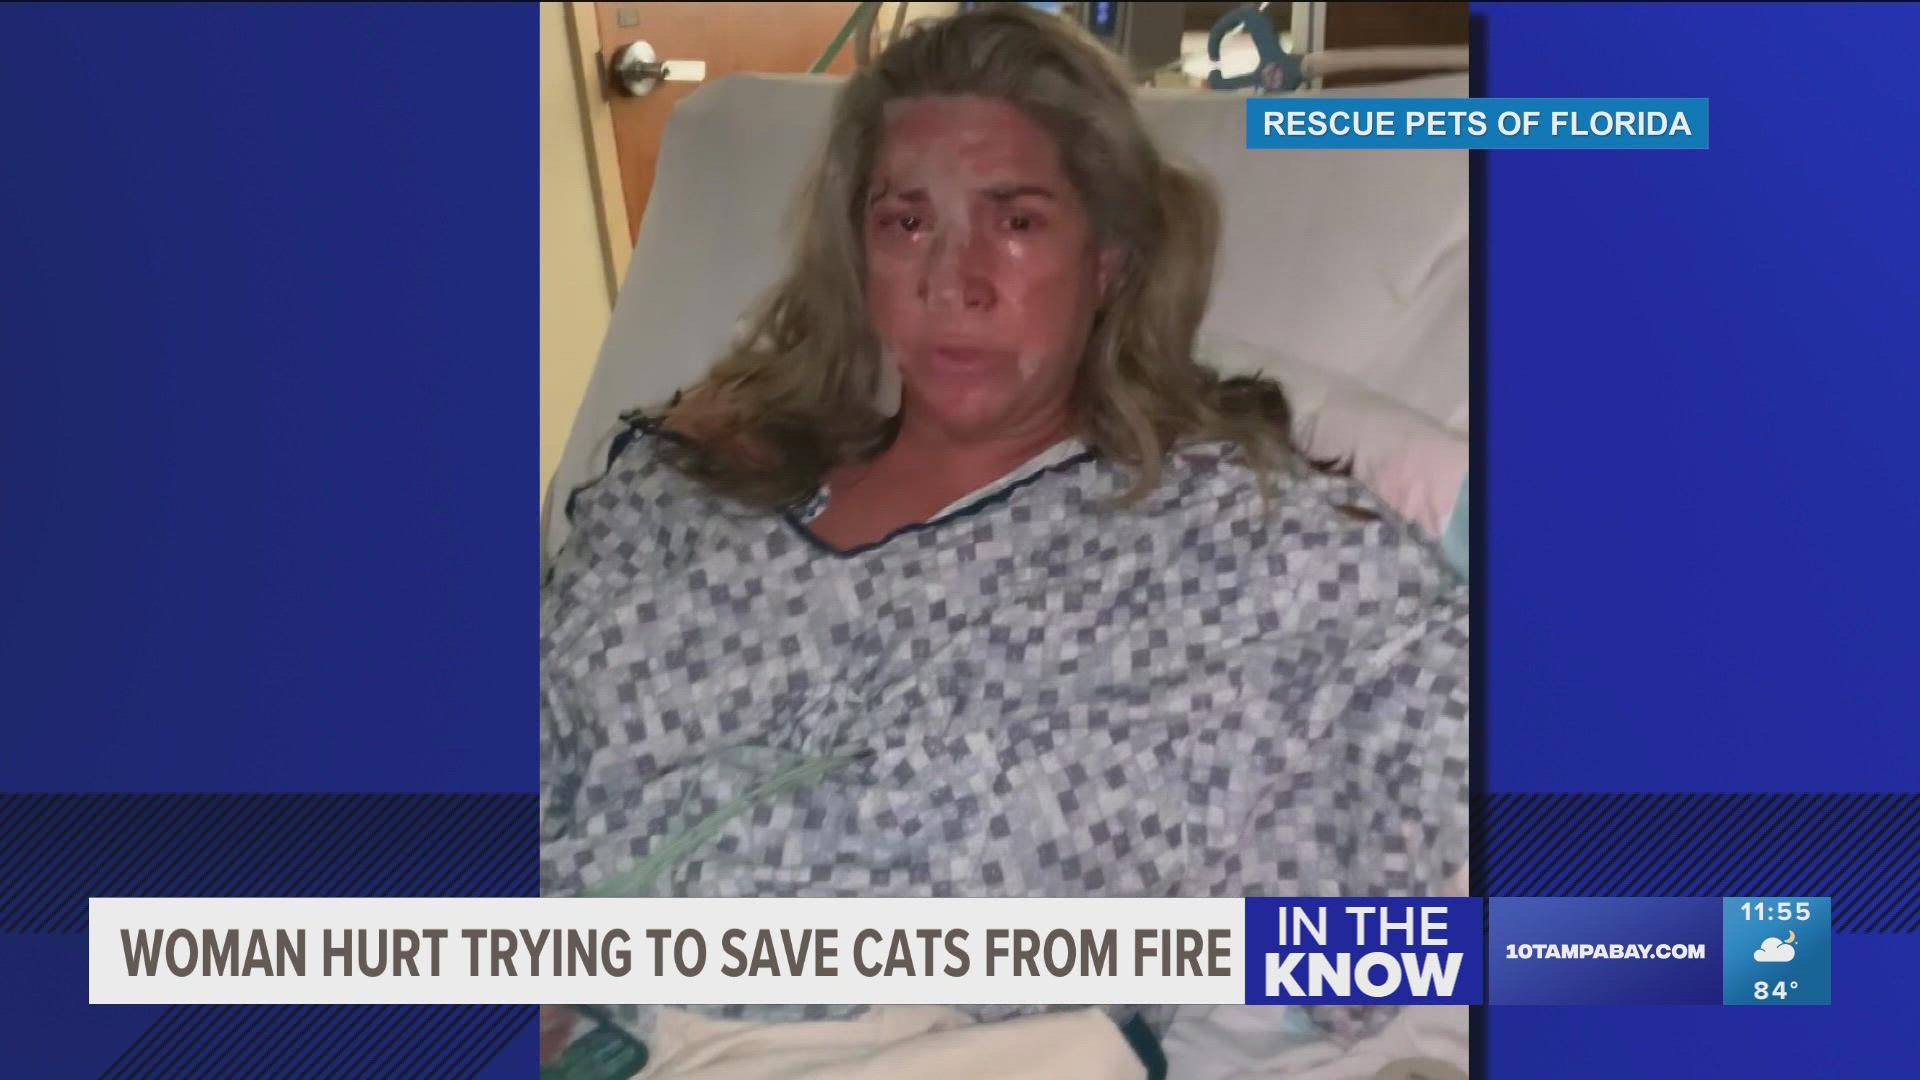 The woman is being treated for burns and respiratory issues, the Rescue Pets of Florida say